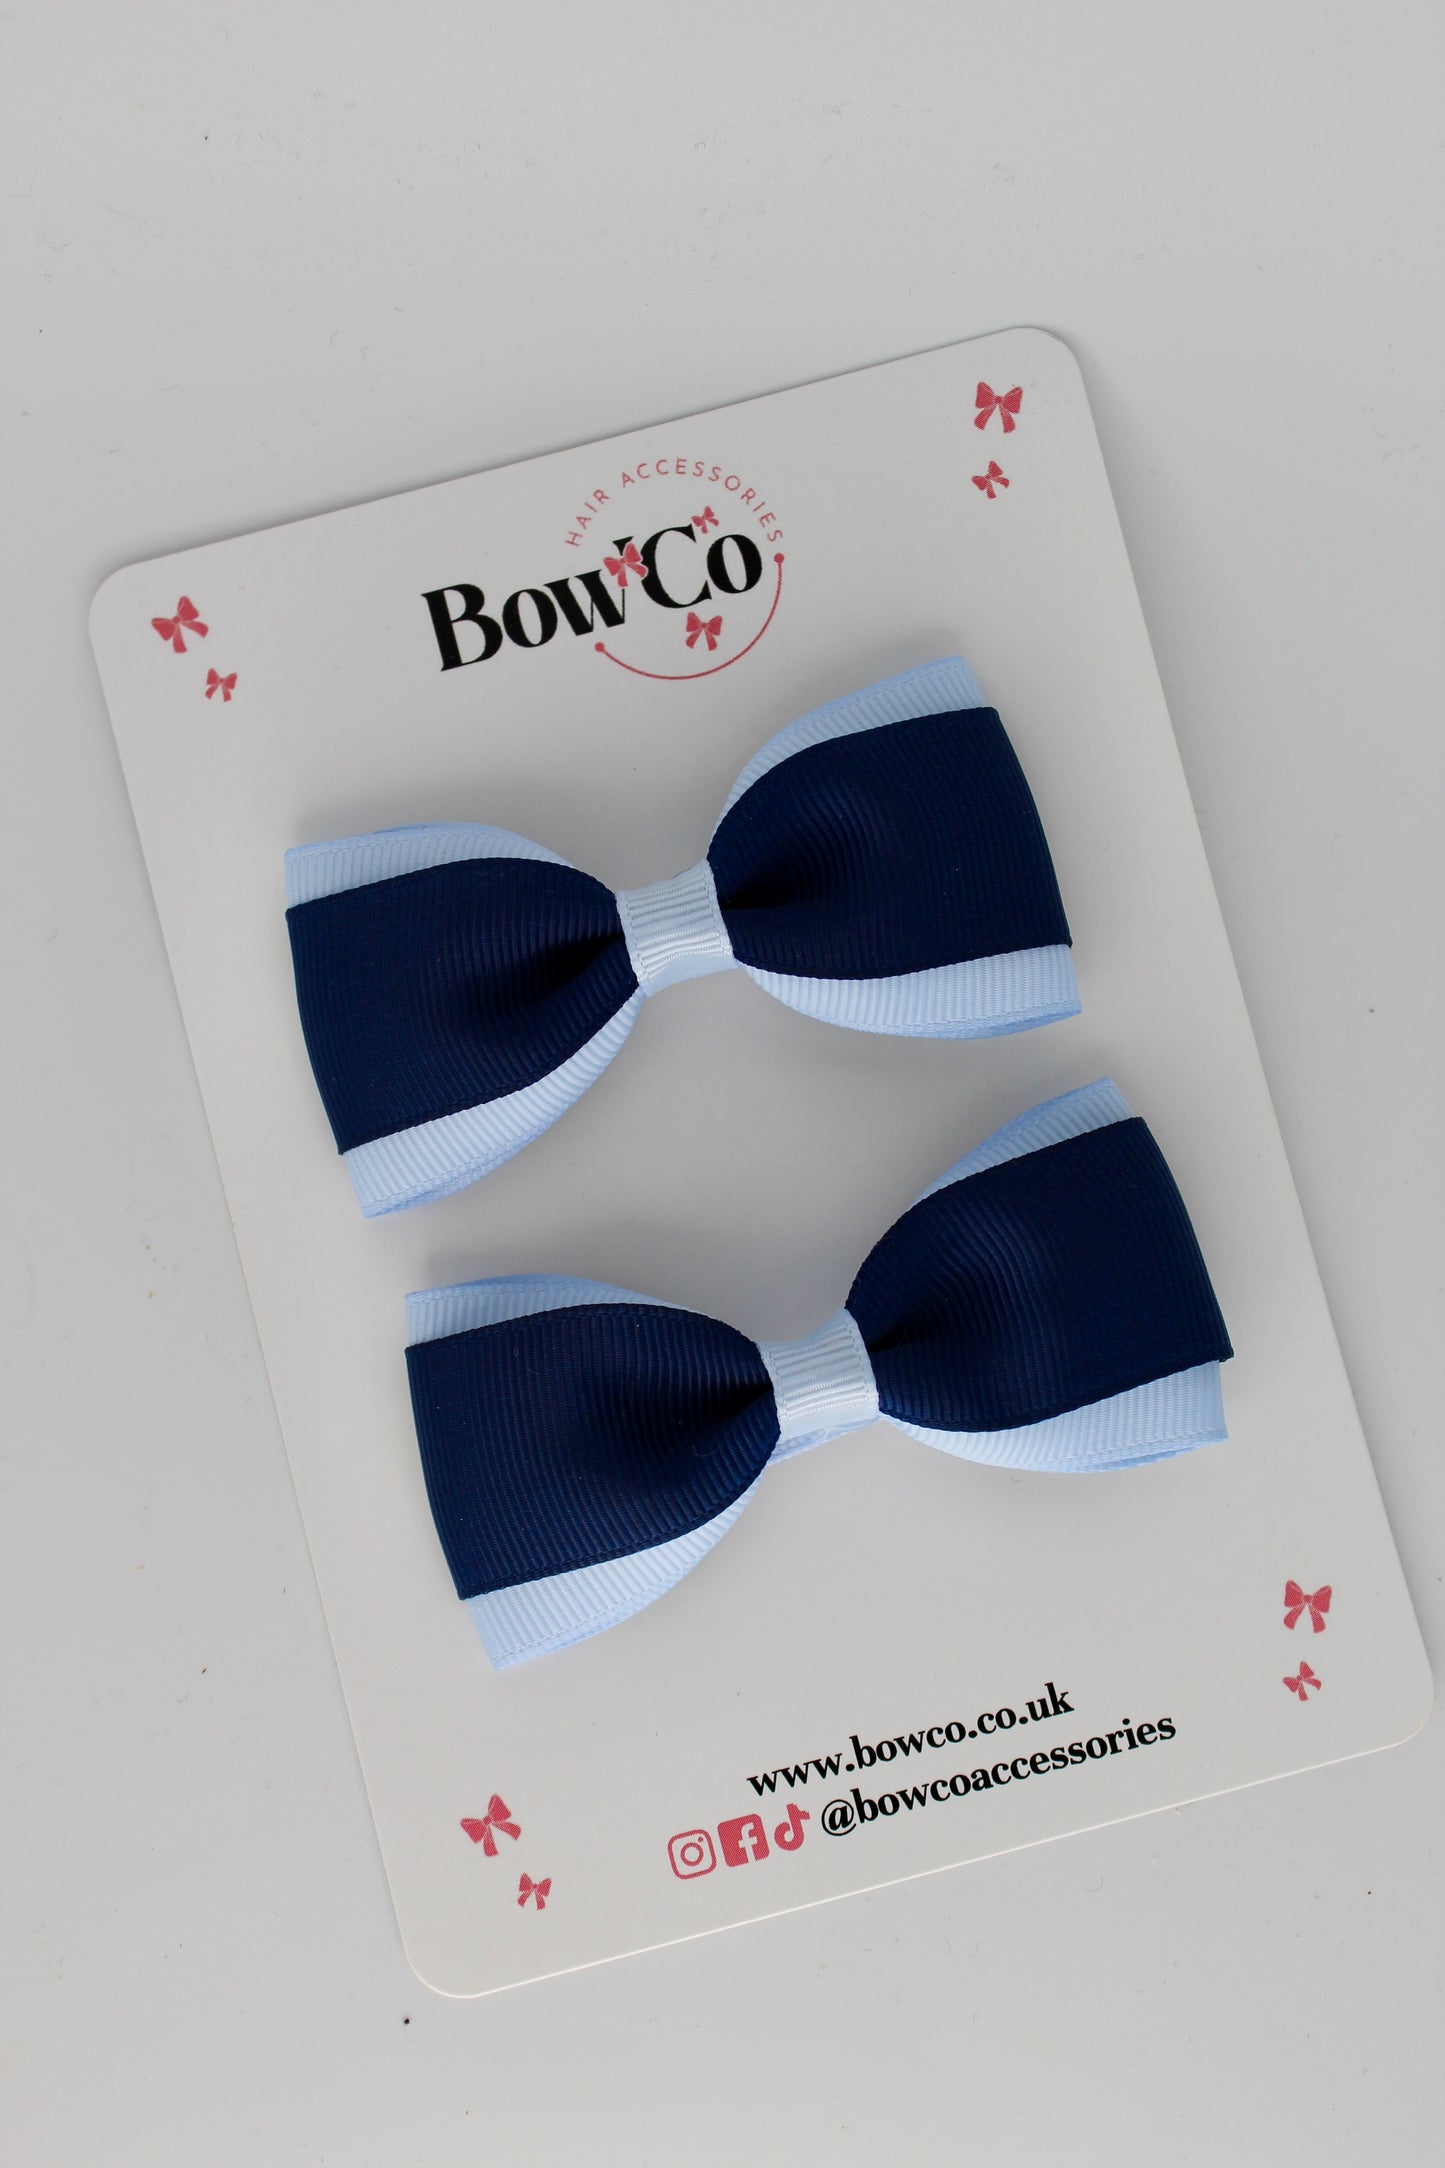 3 Inch Tuxedo Bow - Clip - 2 Pack - Navy Blue and Bluebell